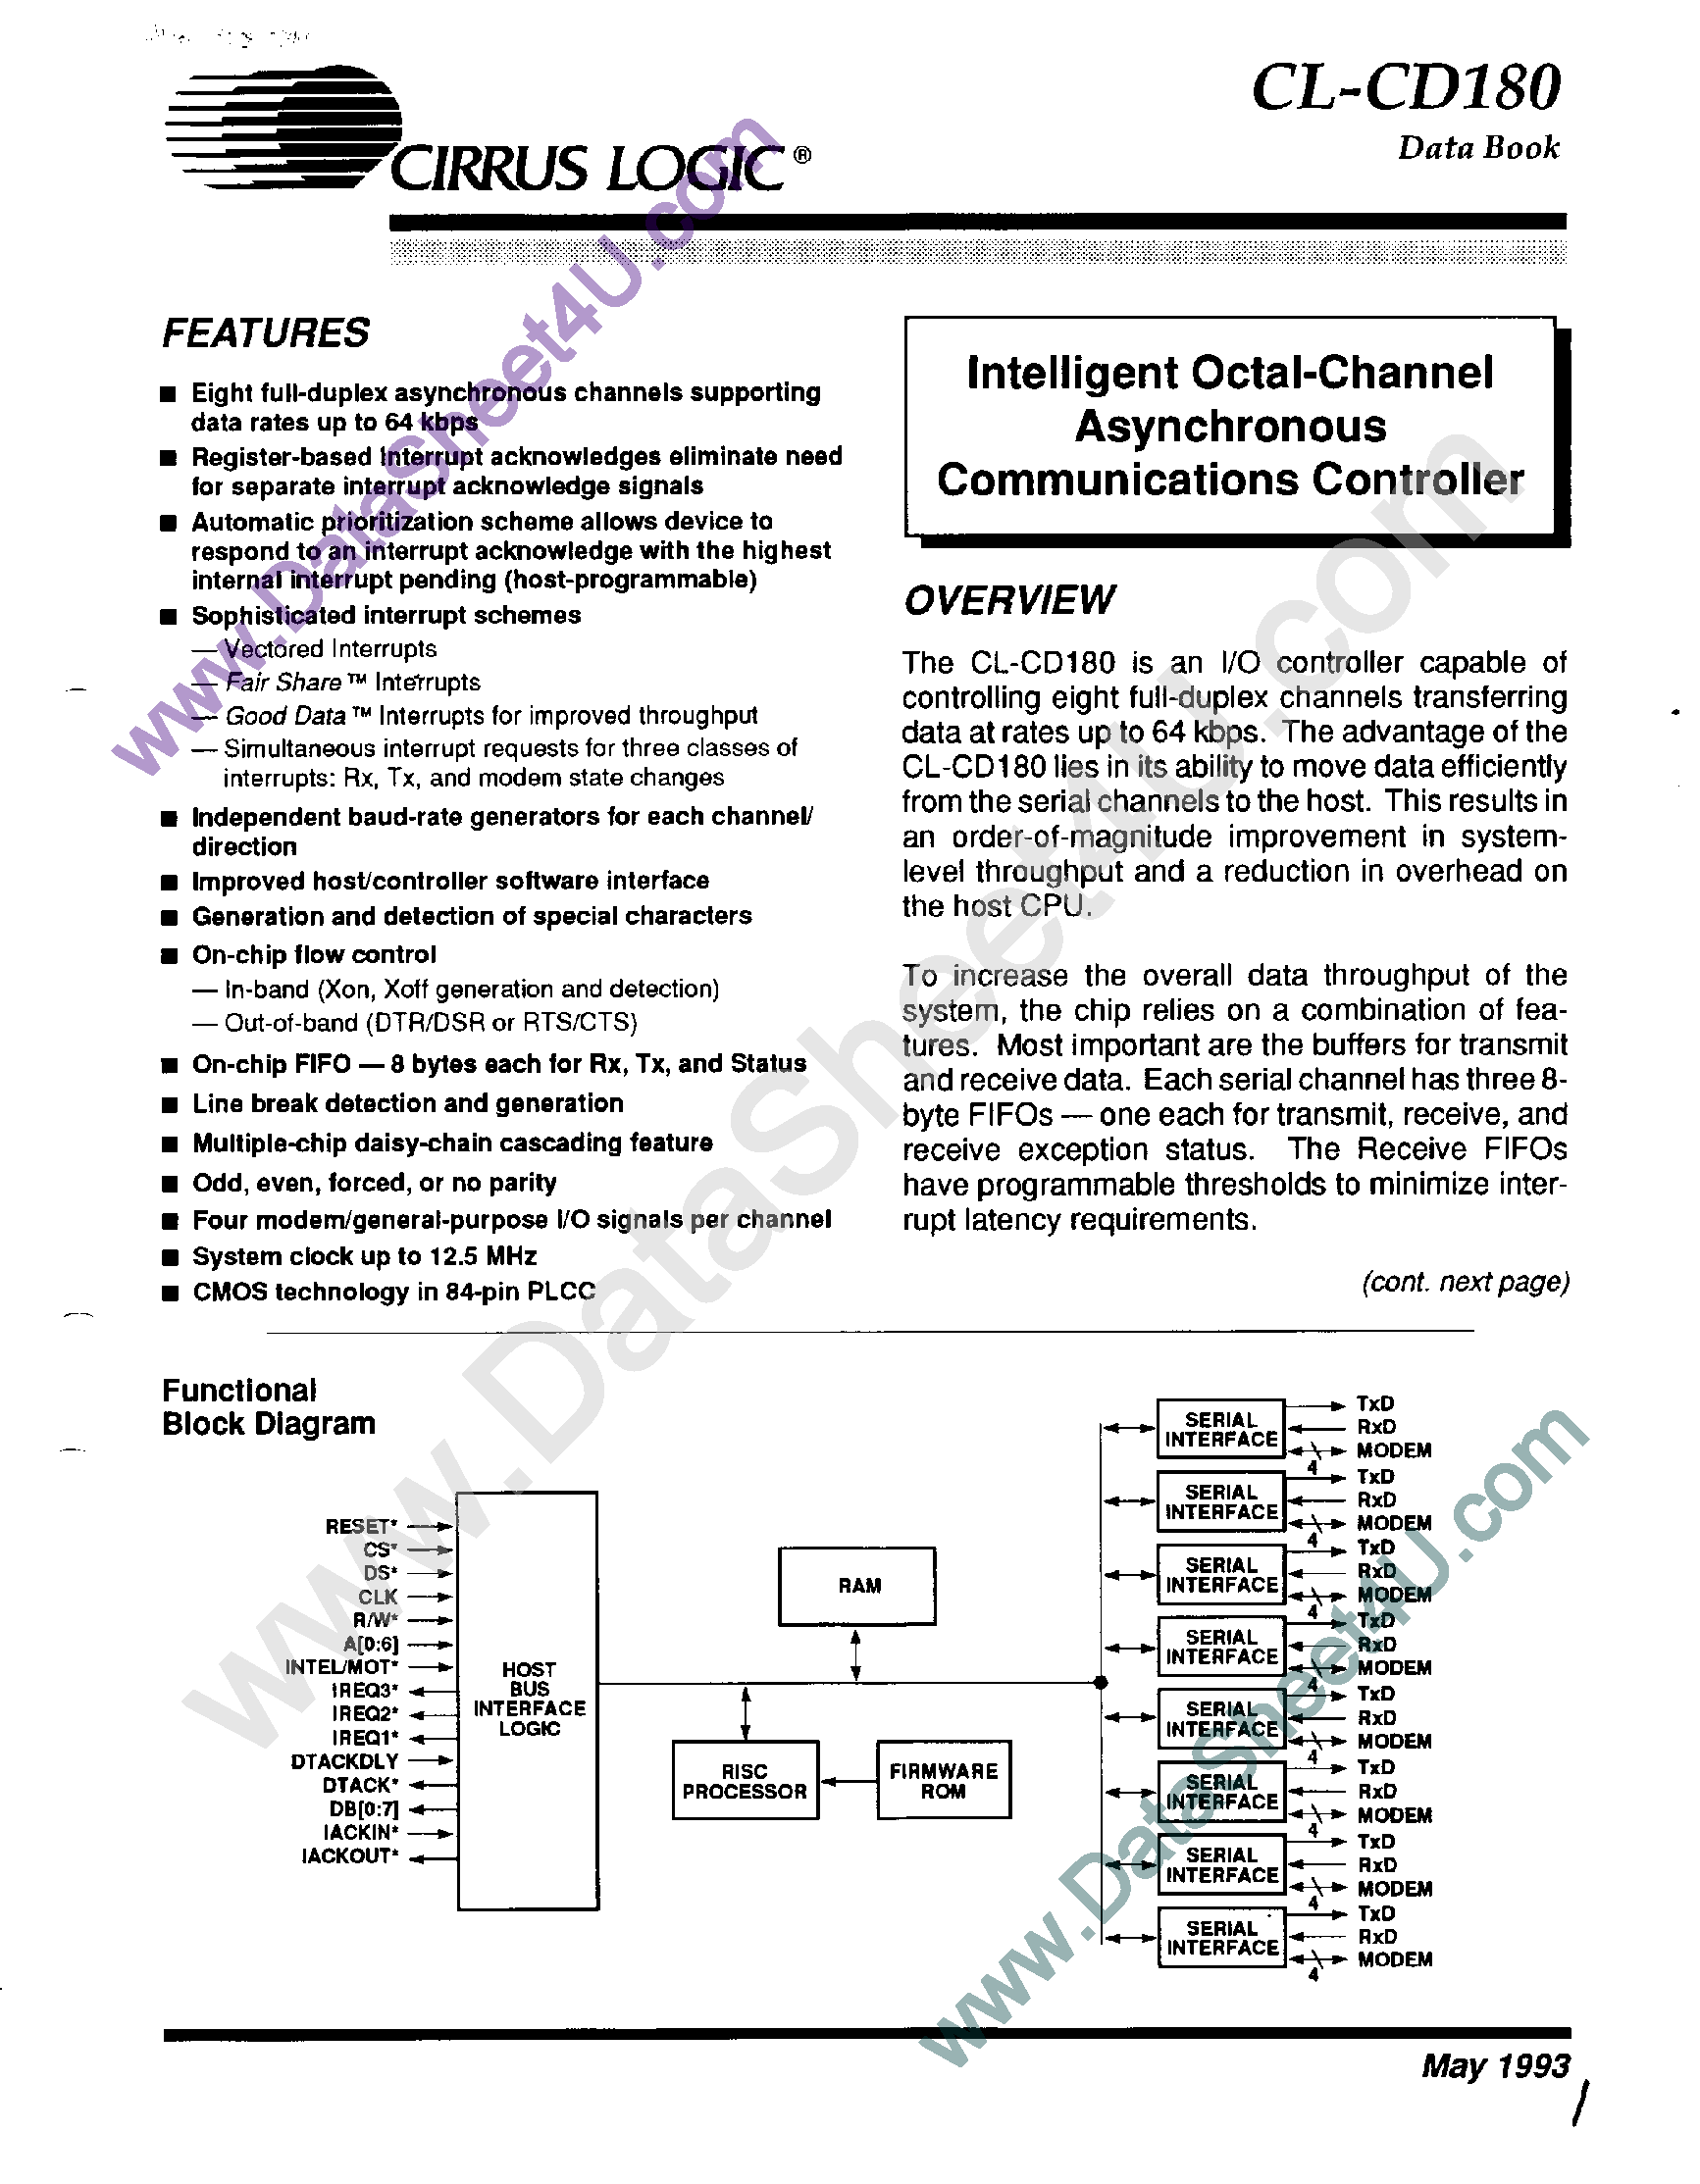 Datasheet CL-CD180 - Intelligent Octal-Channel Asynchronous Communications Controller page 1